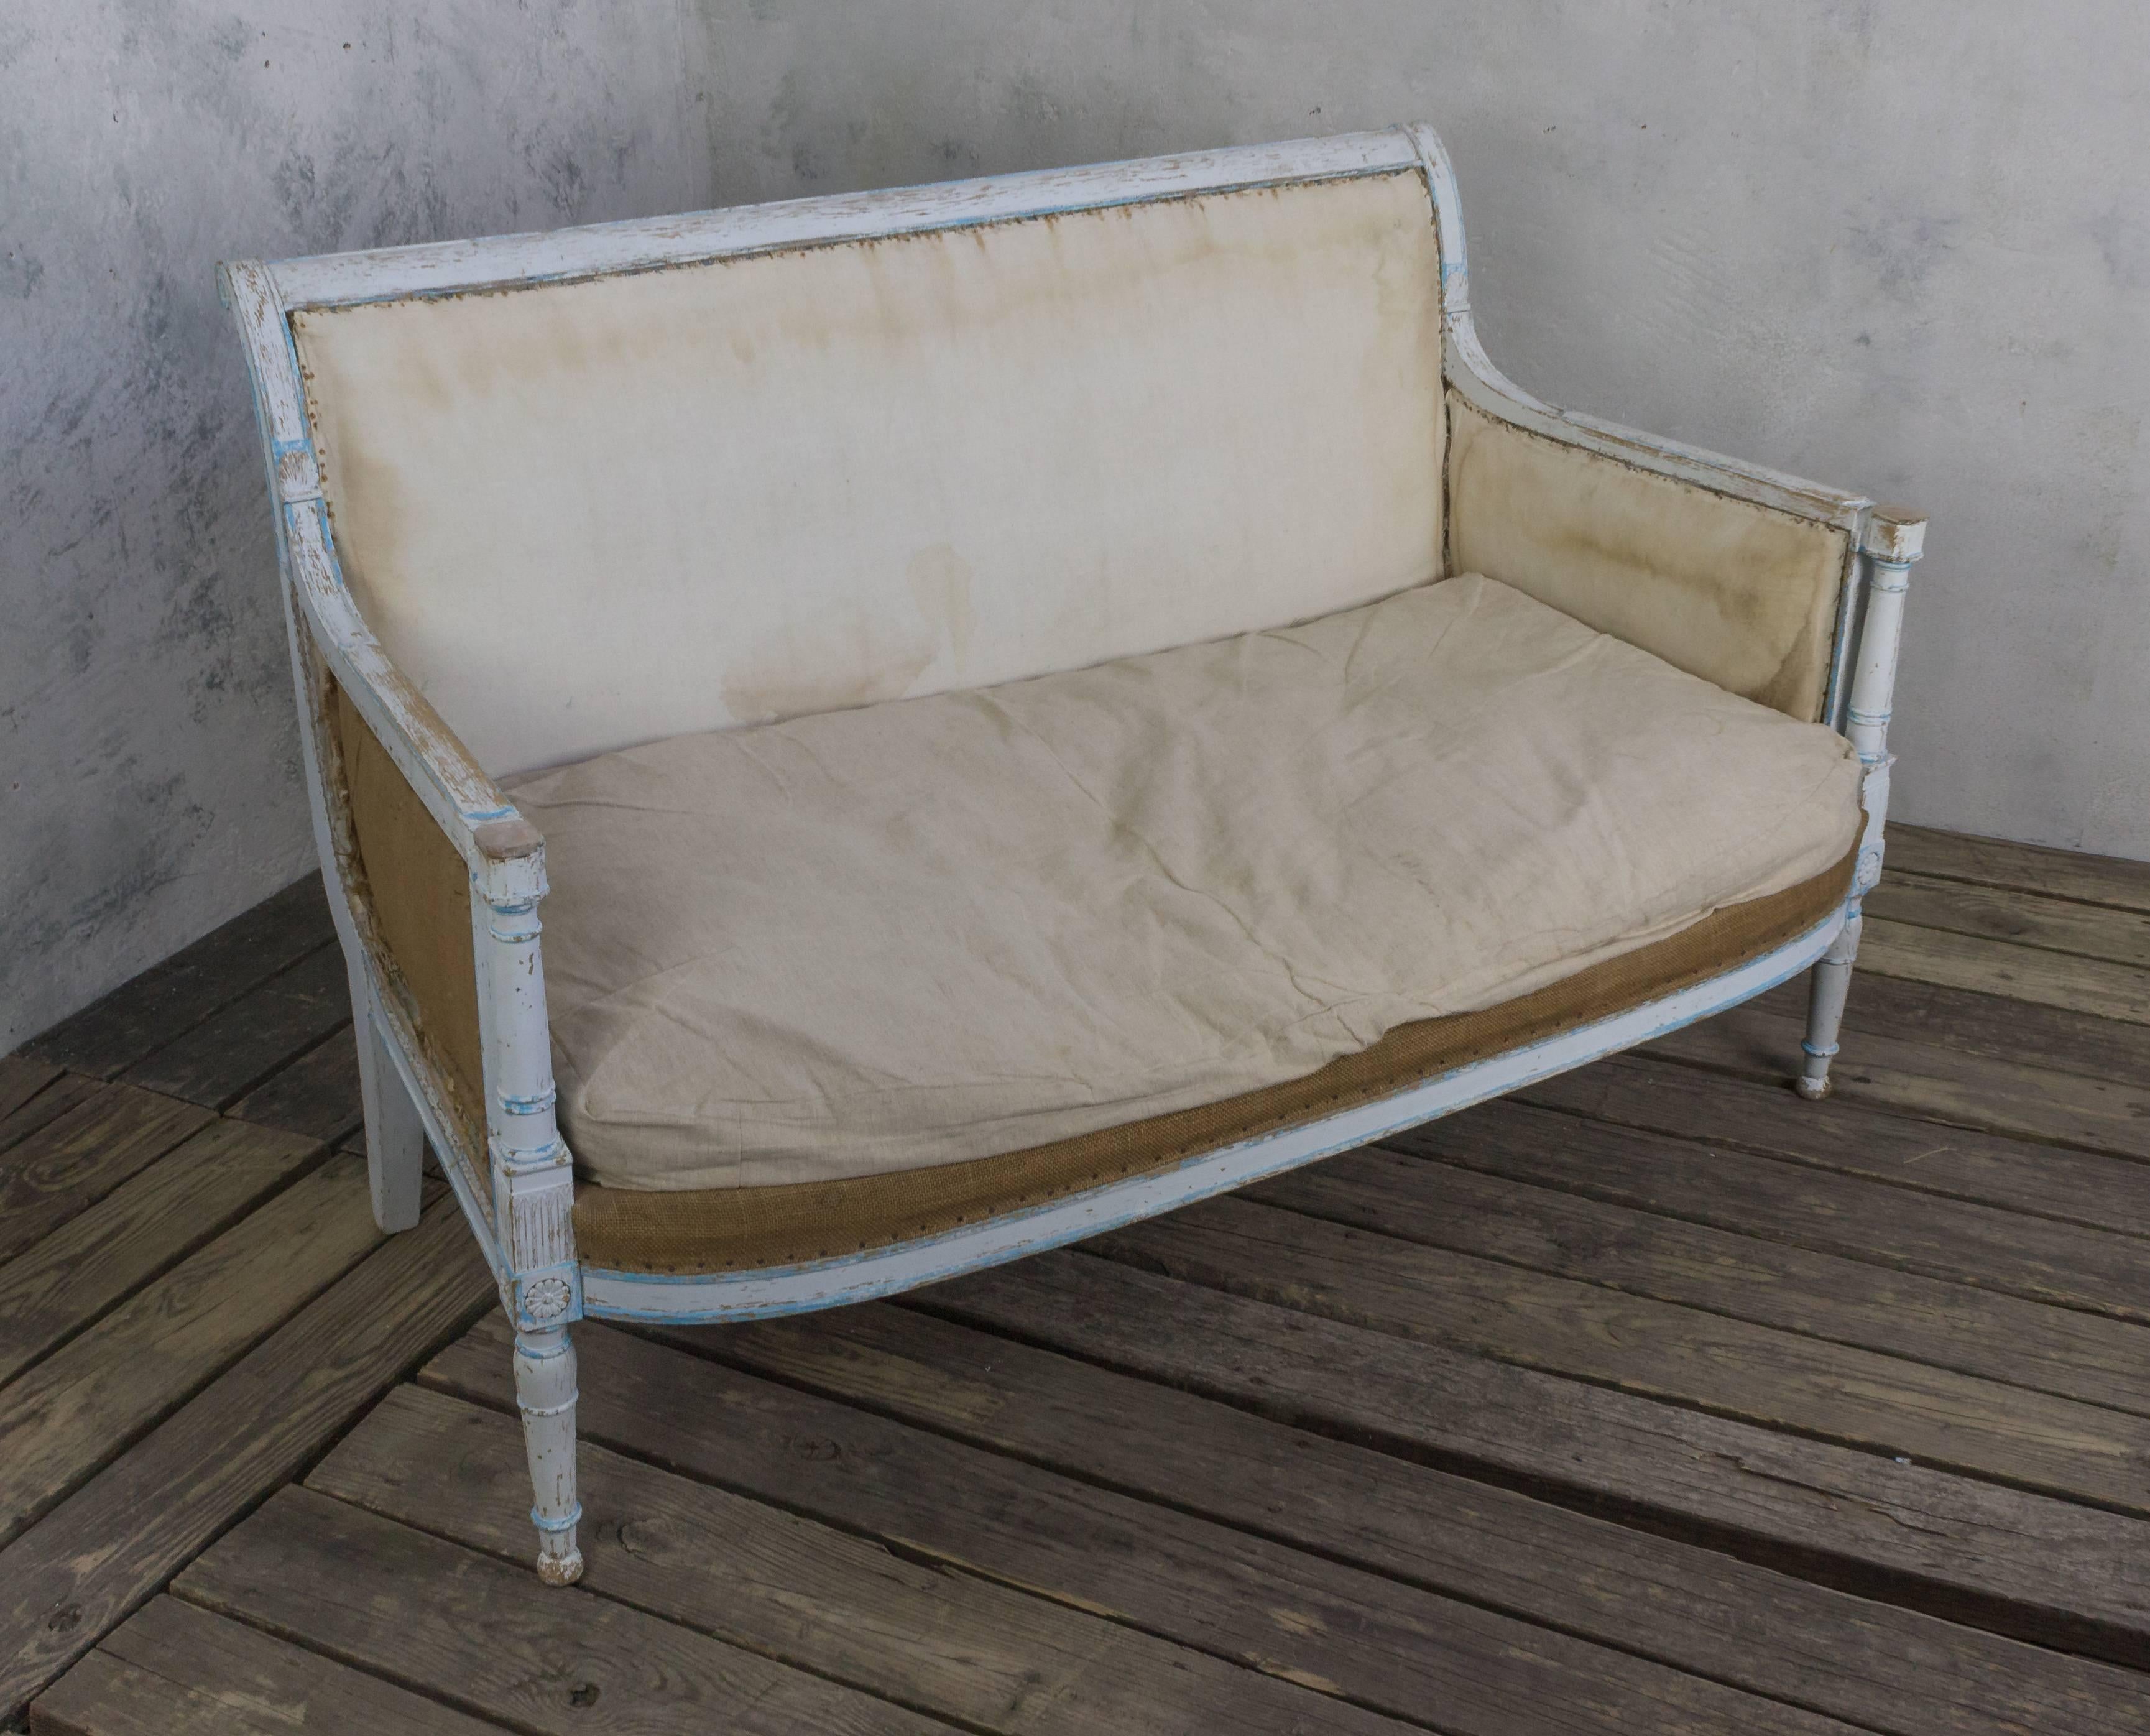 An exceptional French mid 19th century settee in the Directoire style. This settee is a beautiful piece of furniture. The wooden frame still has traces of the original blue-painted decoration over its white patina, and it boasts a loose seat